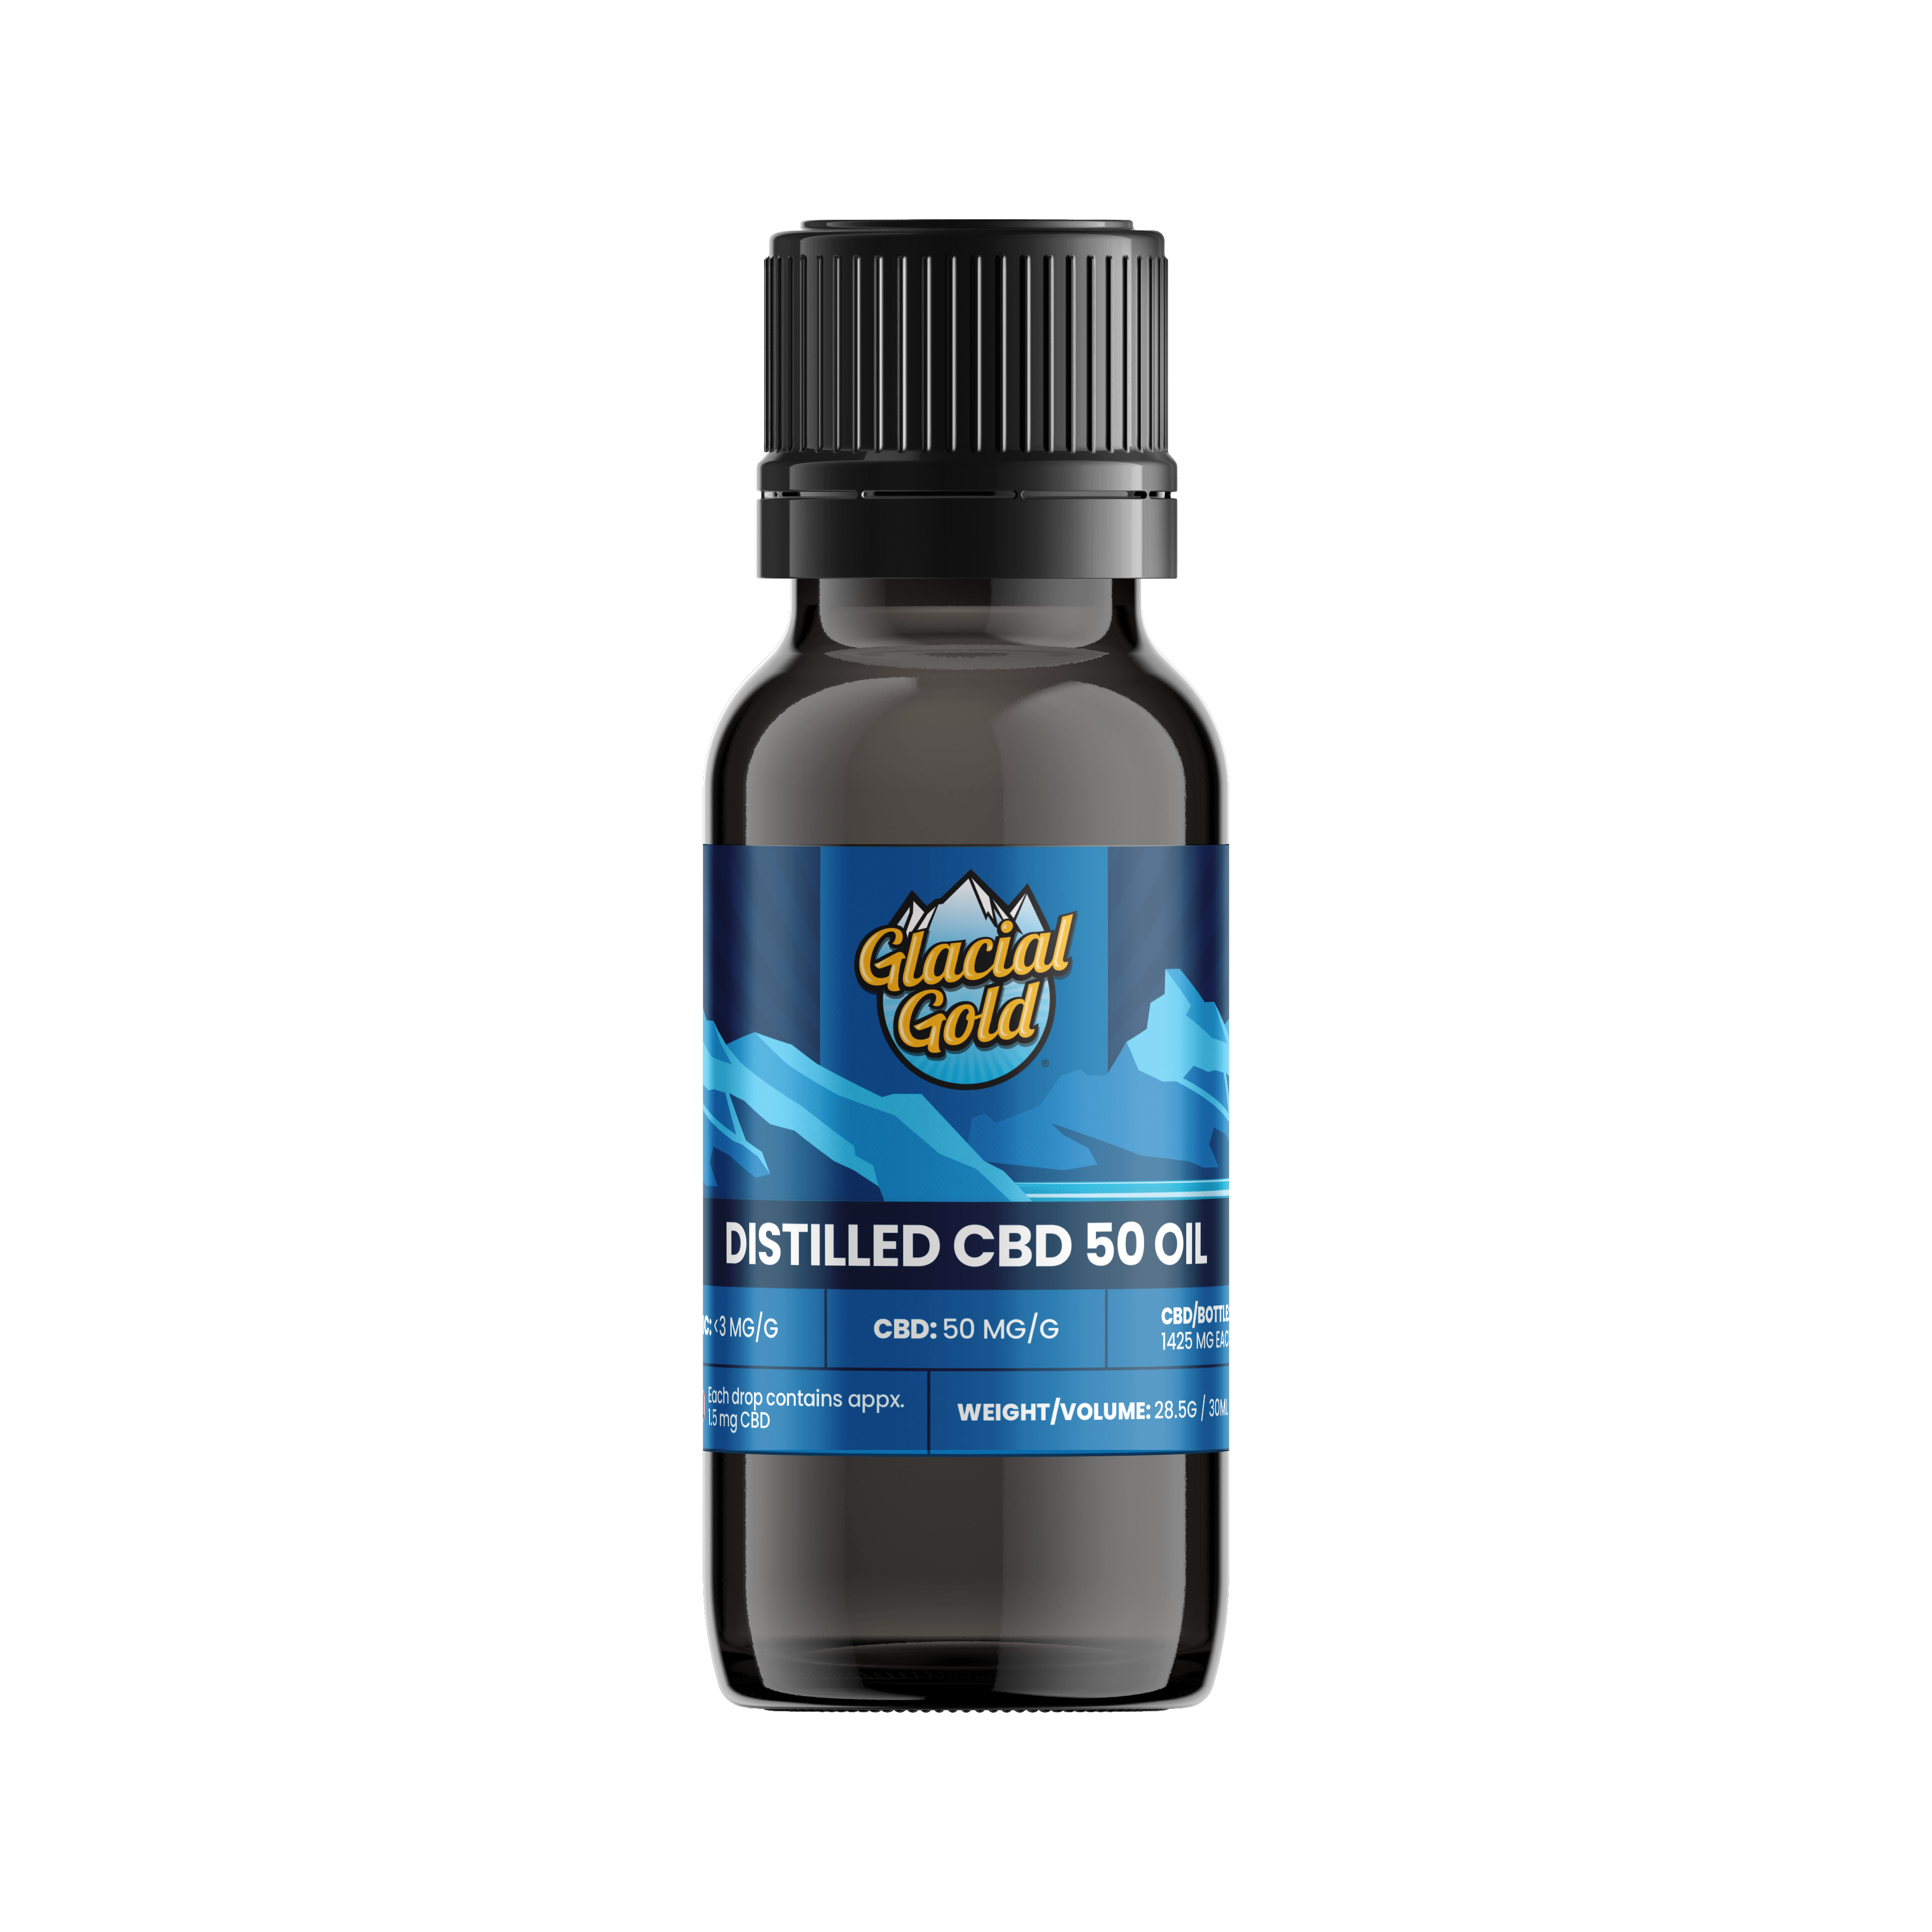 Cannabis Product Distilled CBD 50 Oil by Glacial Gold